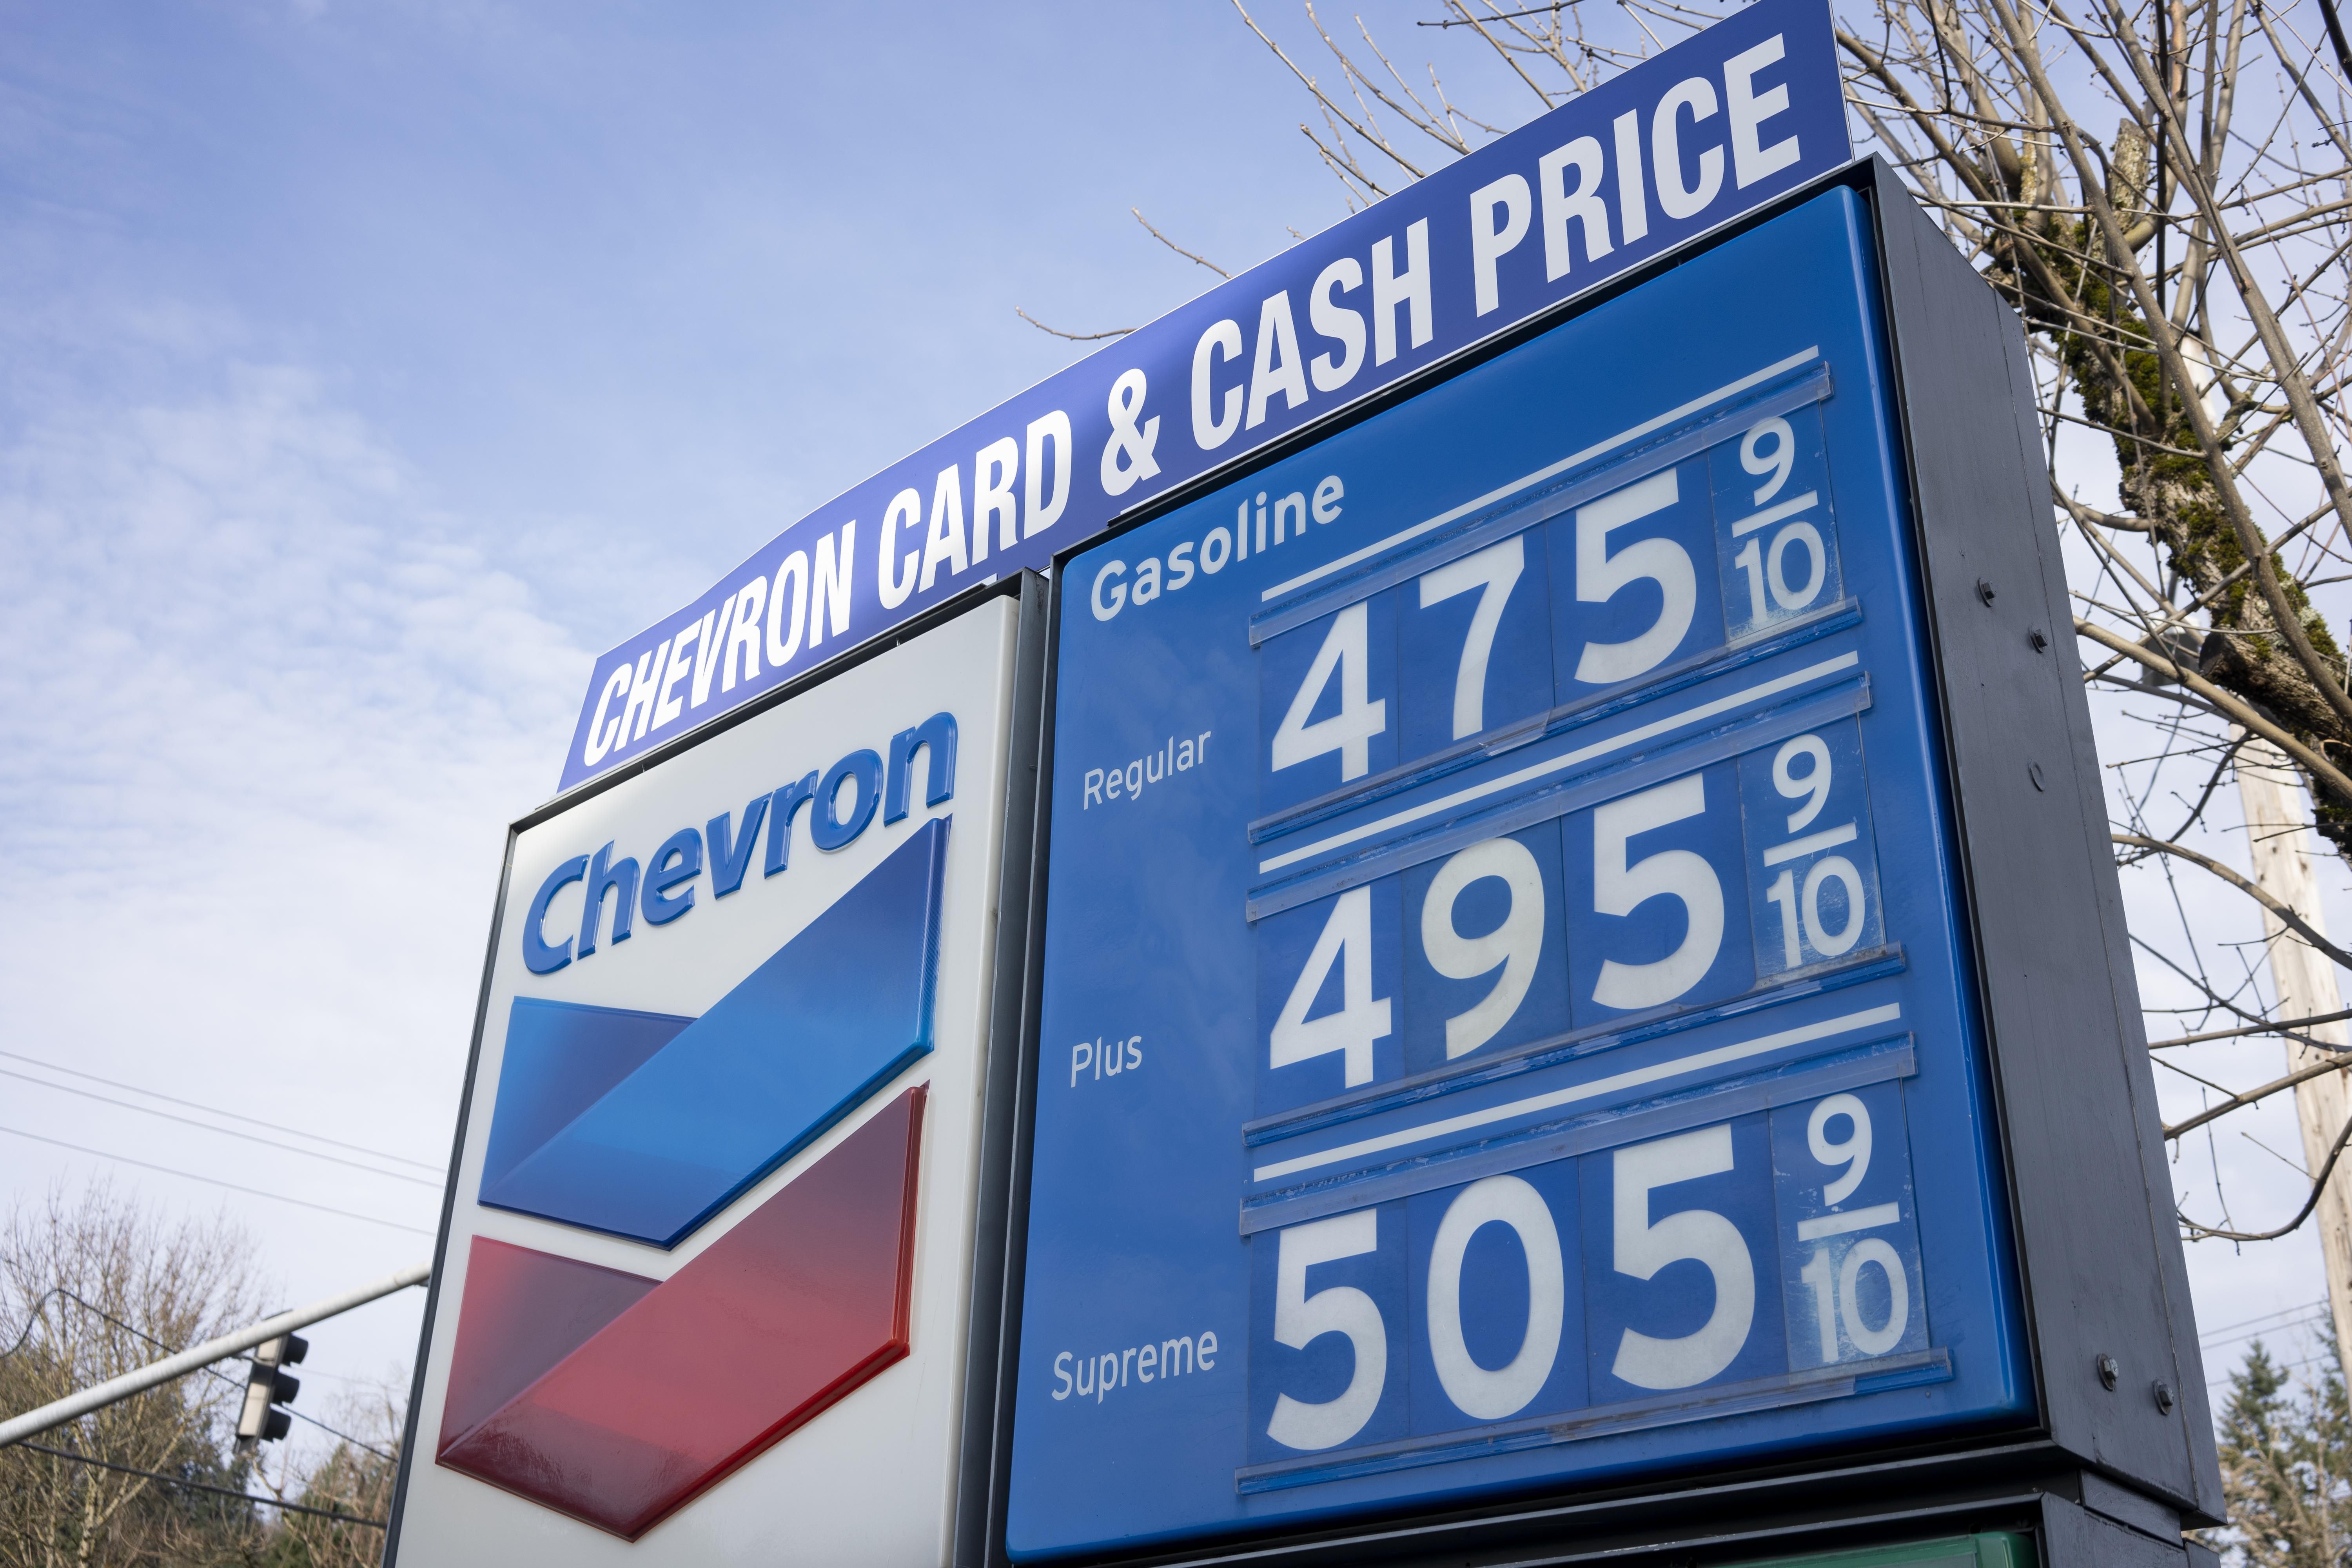 Gas prices at a Chevron station